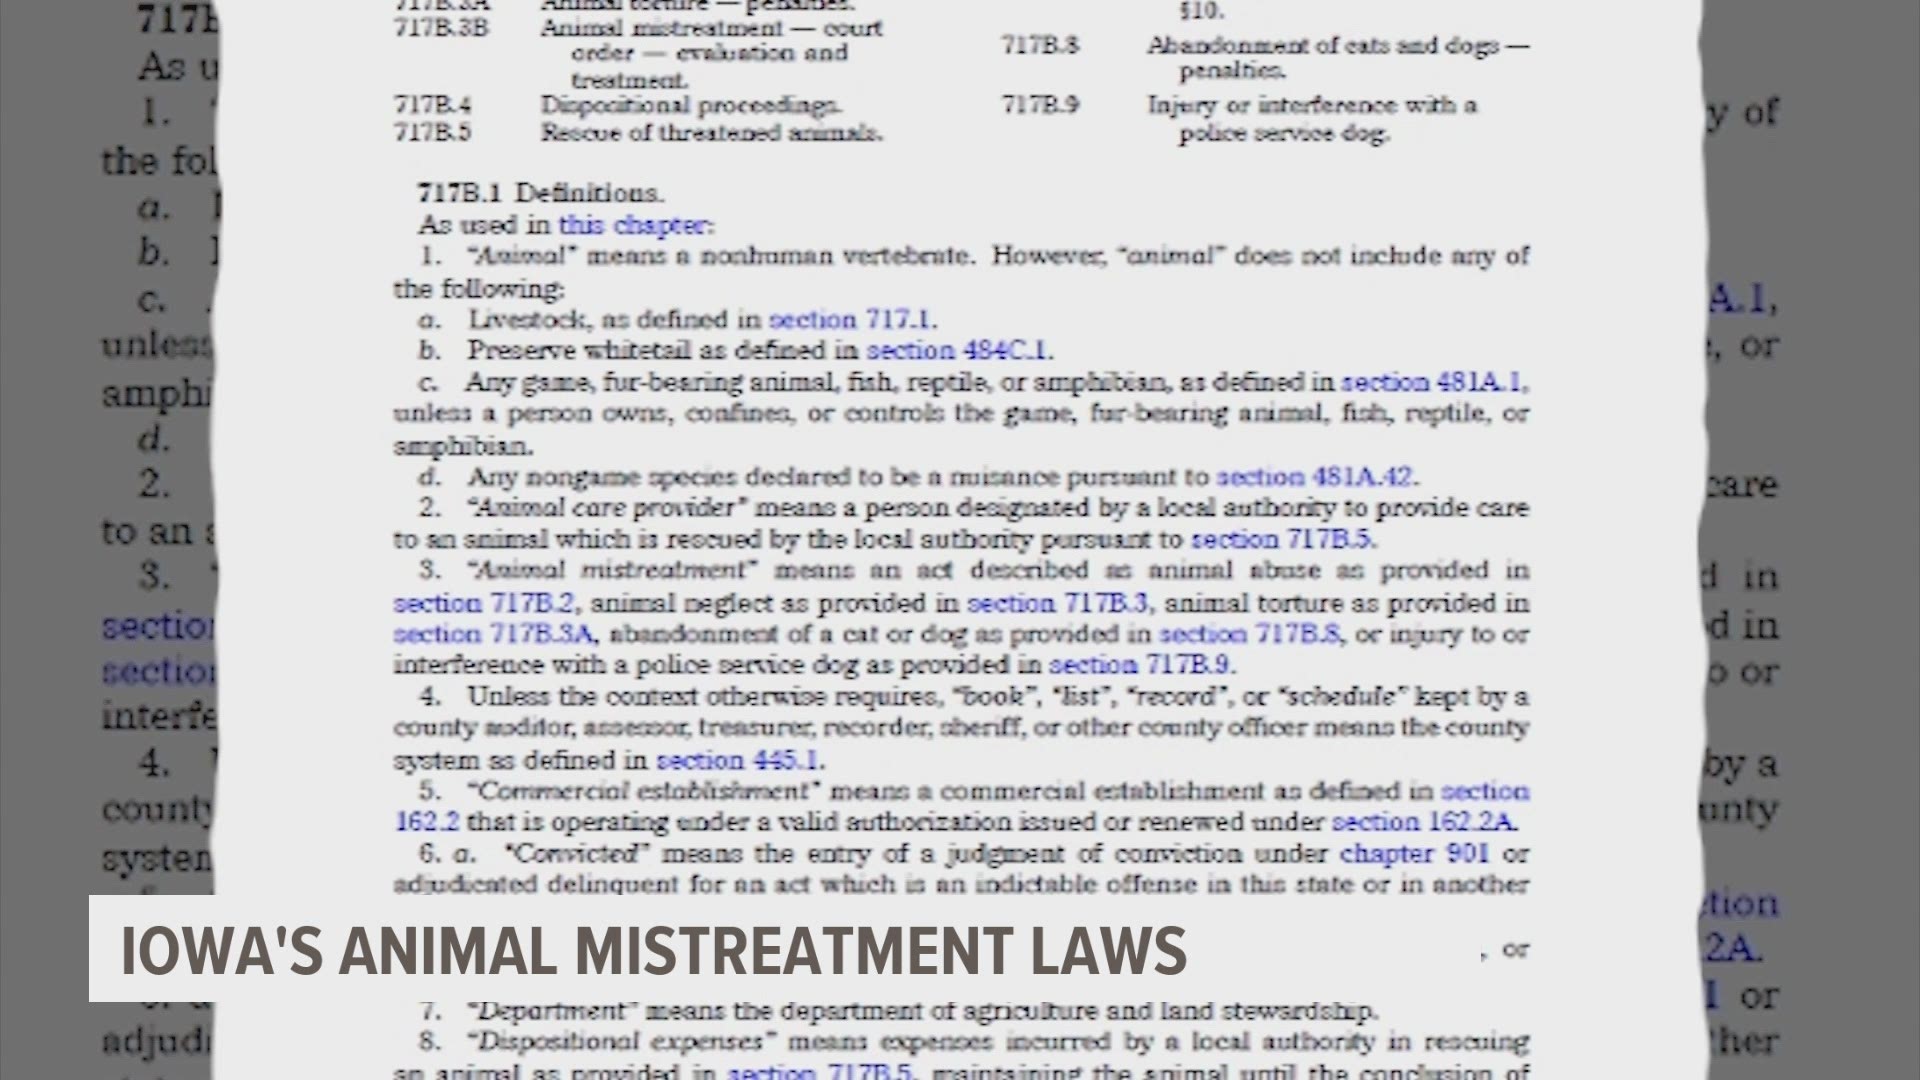 New rules passed just last year help define what mistreatment means and how it's addressed.